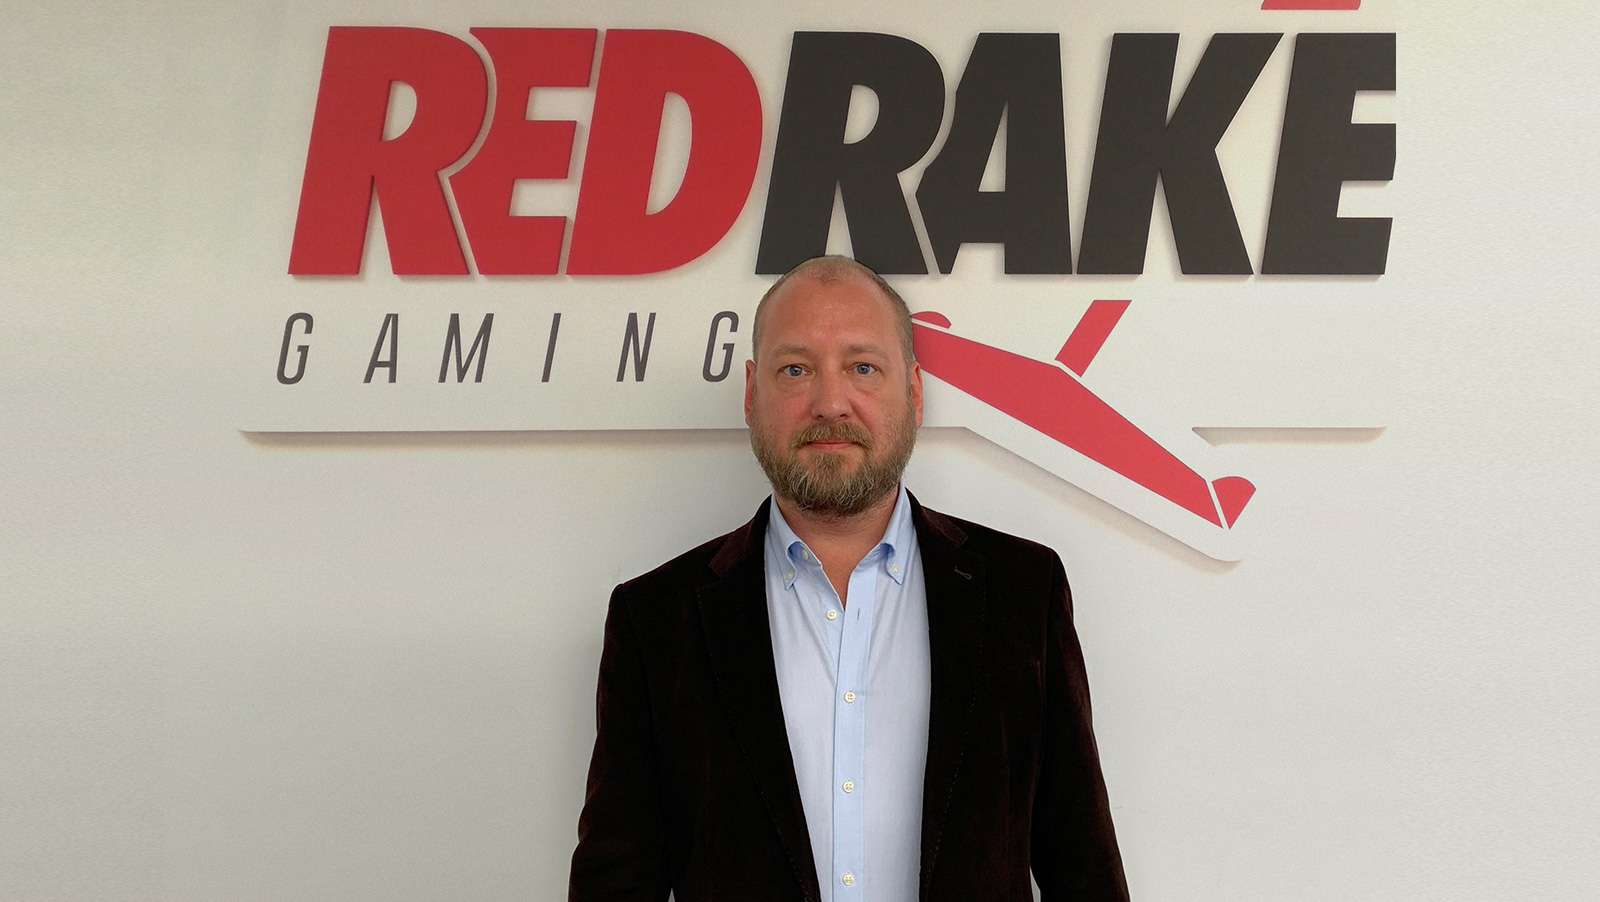 Red Rake Gaming hires Iain Sims to compliance role